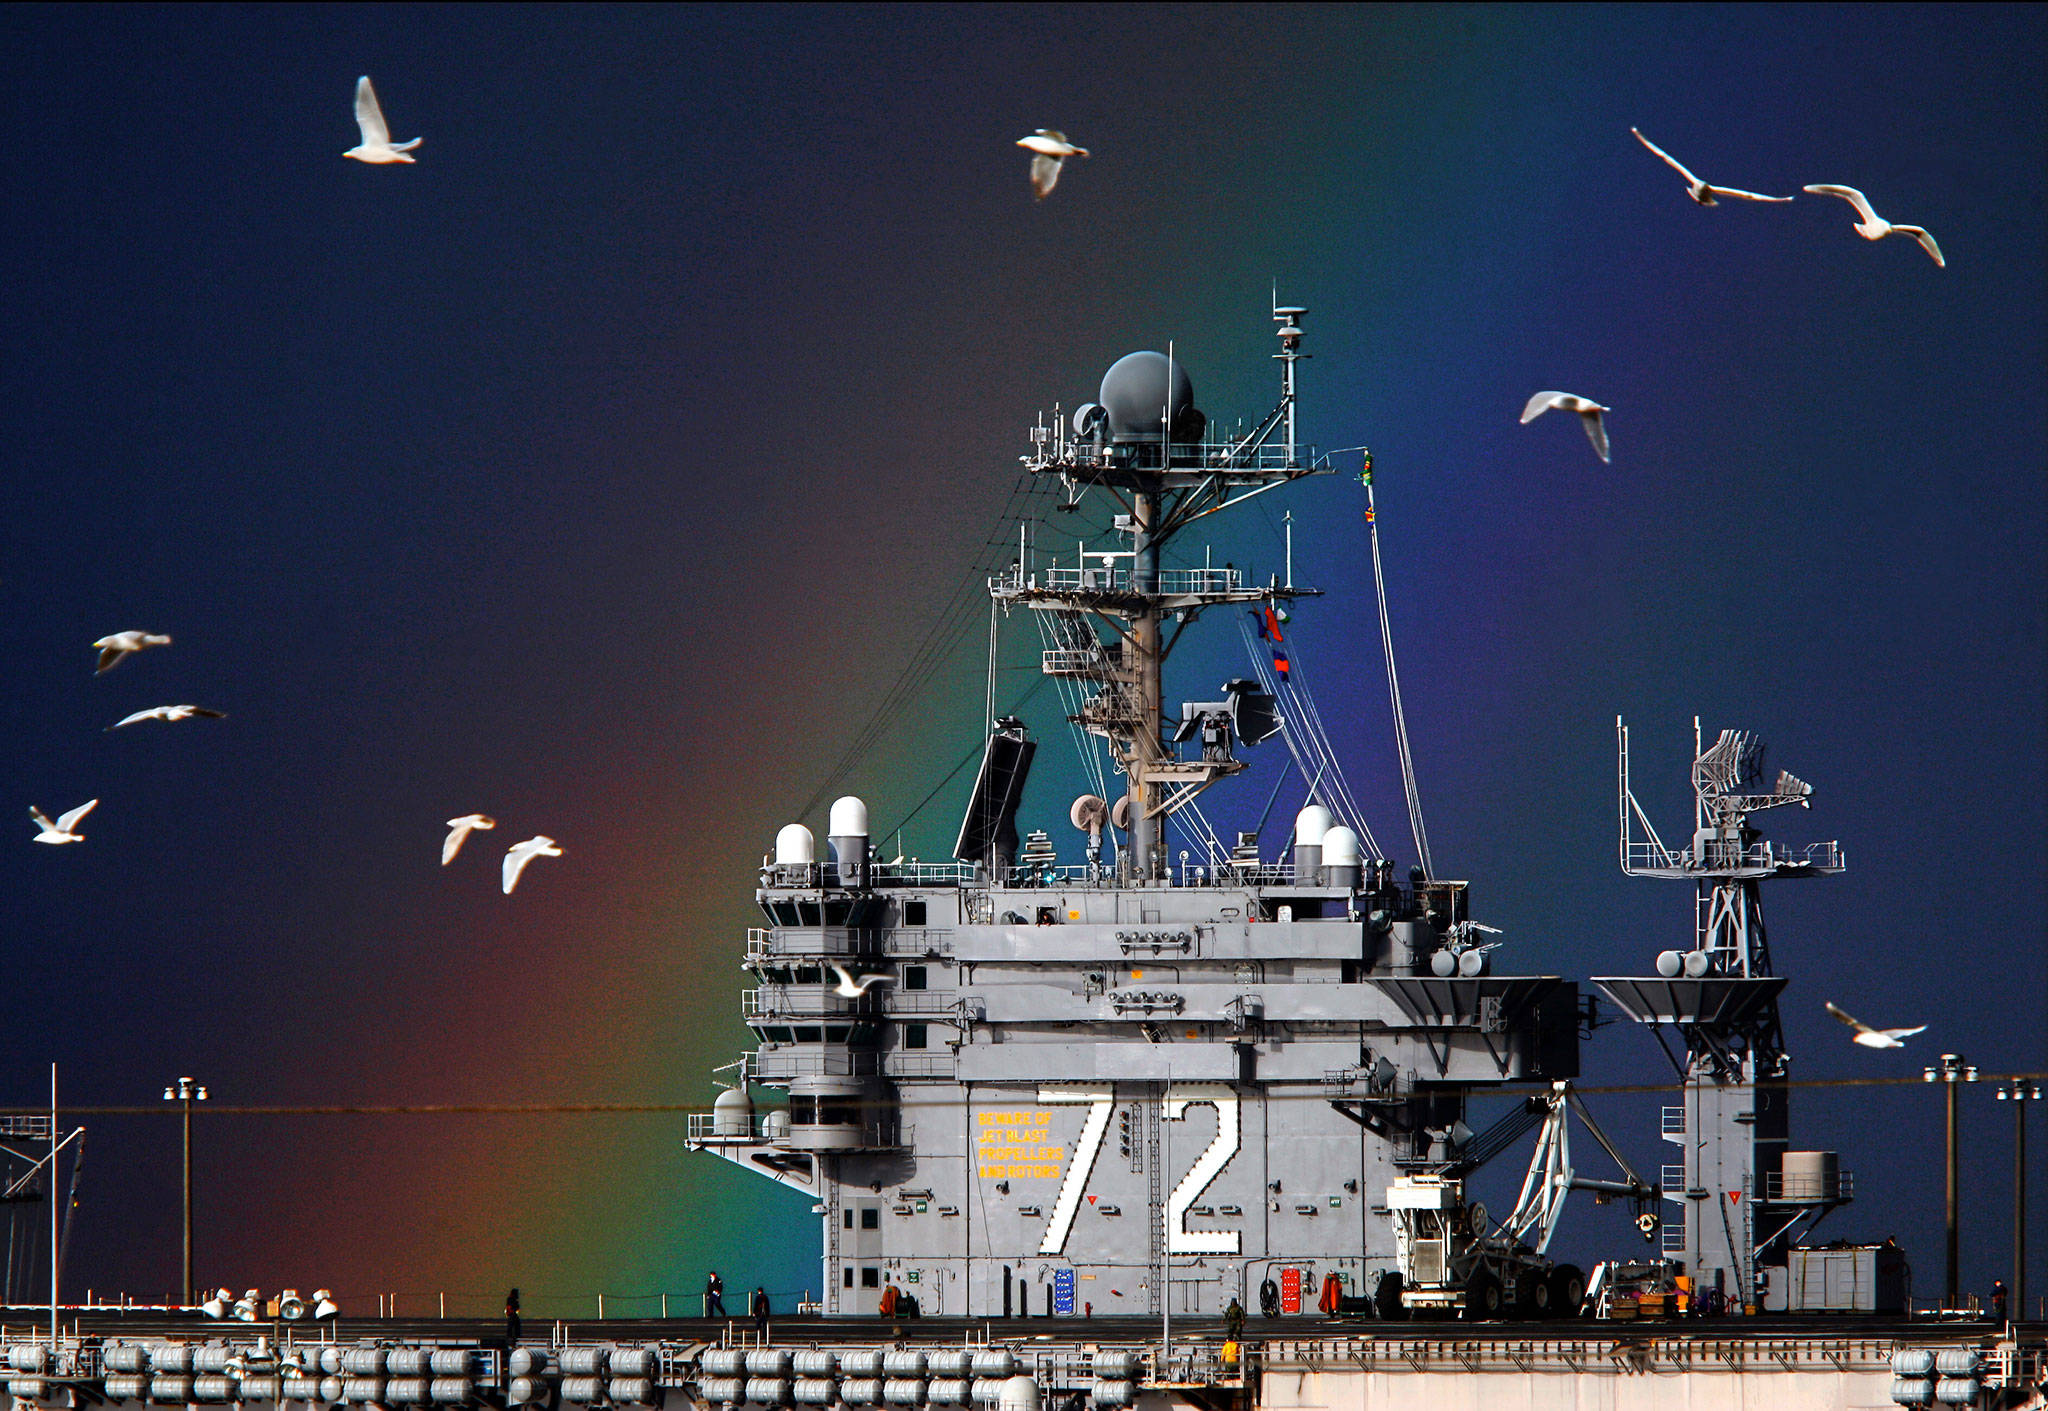 A rainbow strikes gold and gulls fill the sky near the USS Abraham Lincoln while it sits in port at Naval Station Everett on a January morning in 2010. (Dan Bates / Herald file photo)